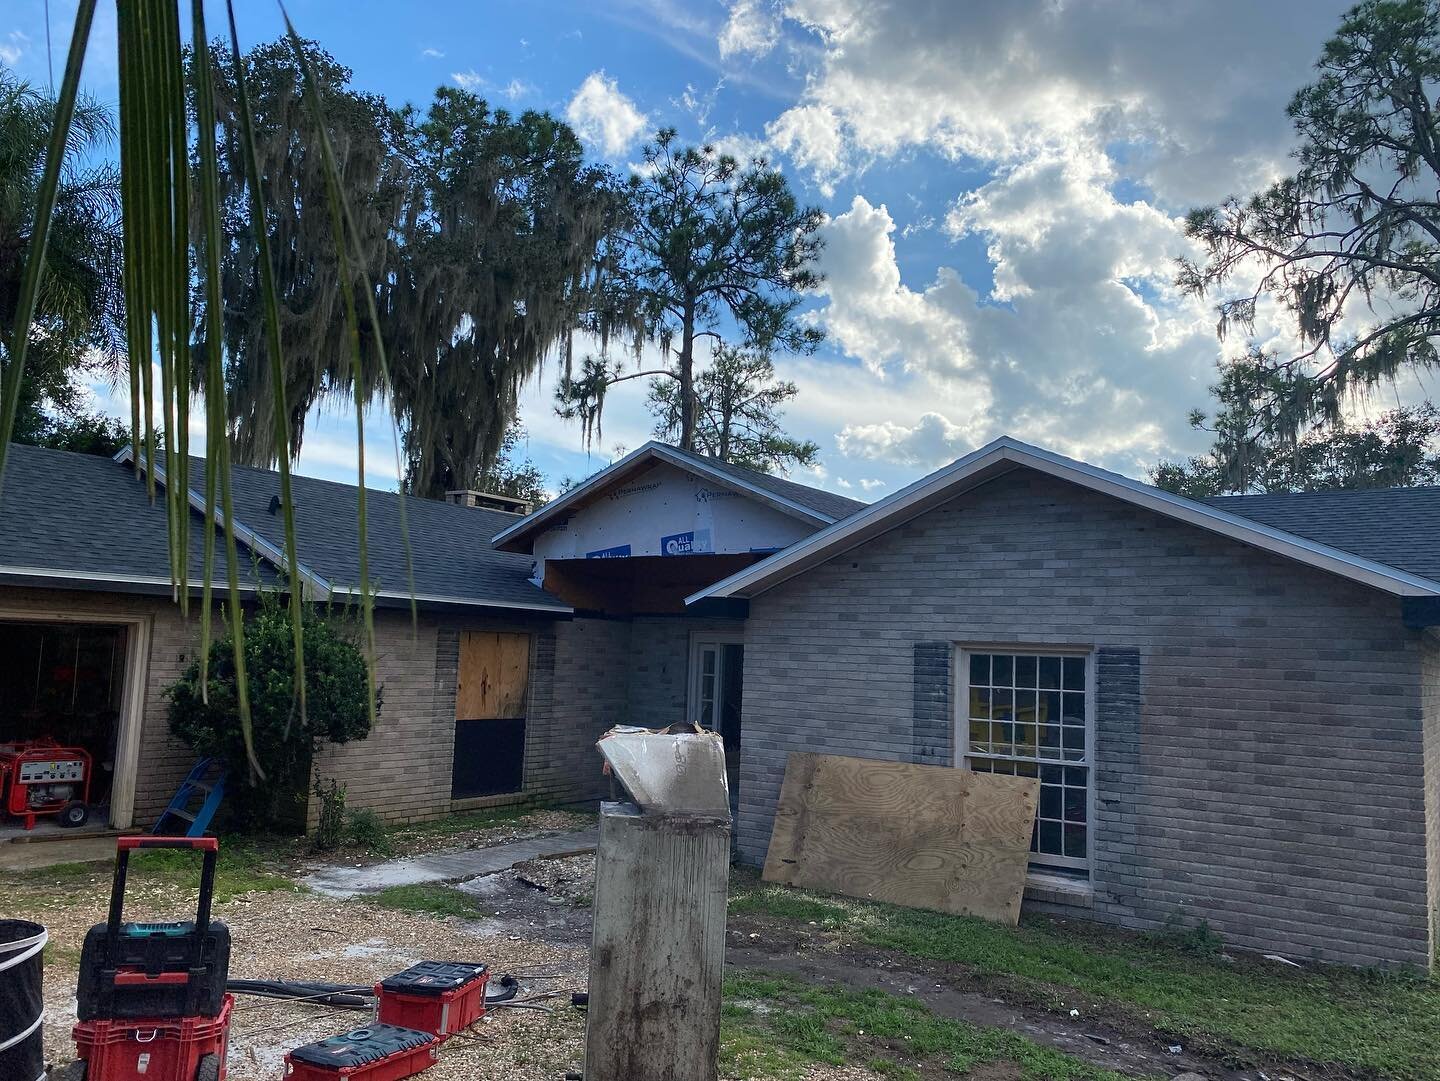 Take a look at these pics from this remodel job. This home owner made the solid choice to have us spray foam insulate the home. This is going to save him a fortune on his power bill, and help keep this home very comfortable. Thinking spray foam insul